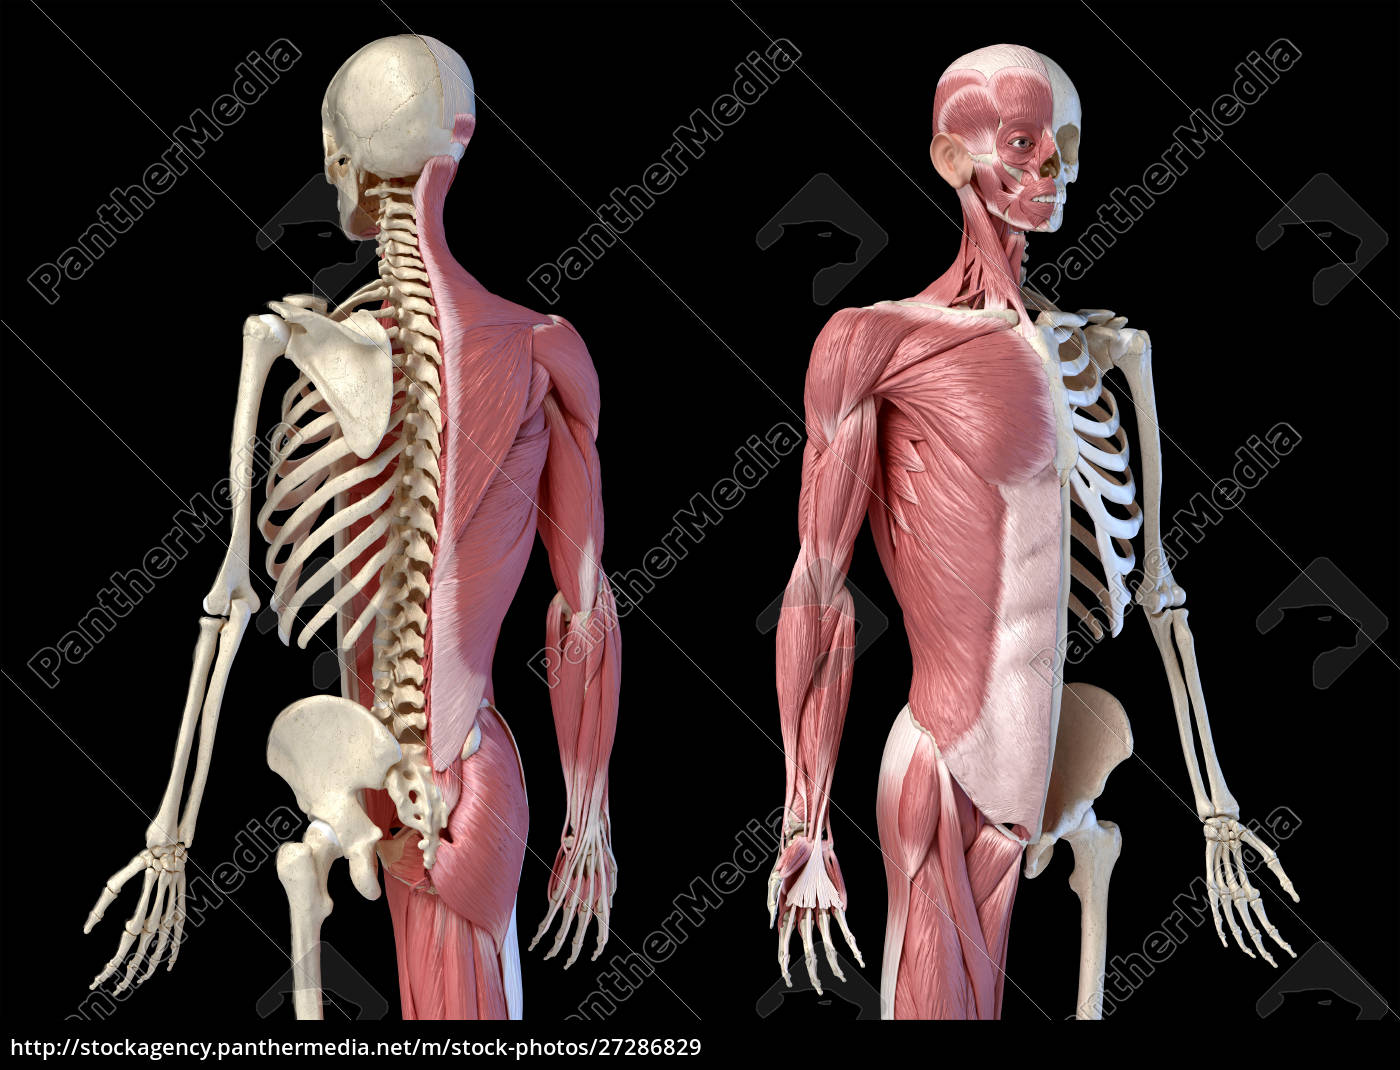 Anatomy of male human skeleton, front view and back view  Human skeleton,  Skeleton anatomy, Human skeleton anatomy